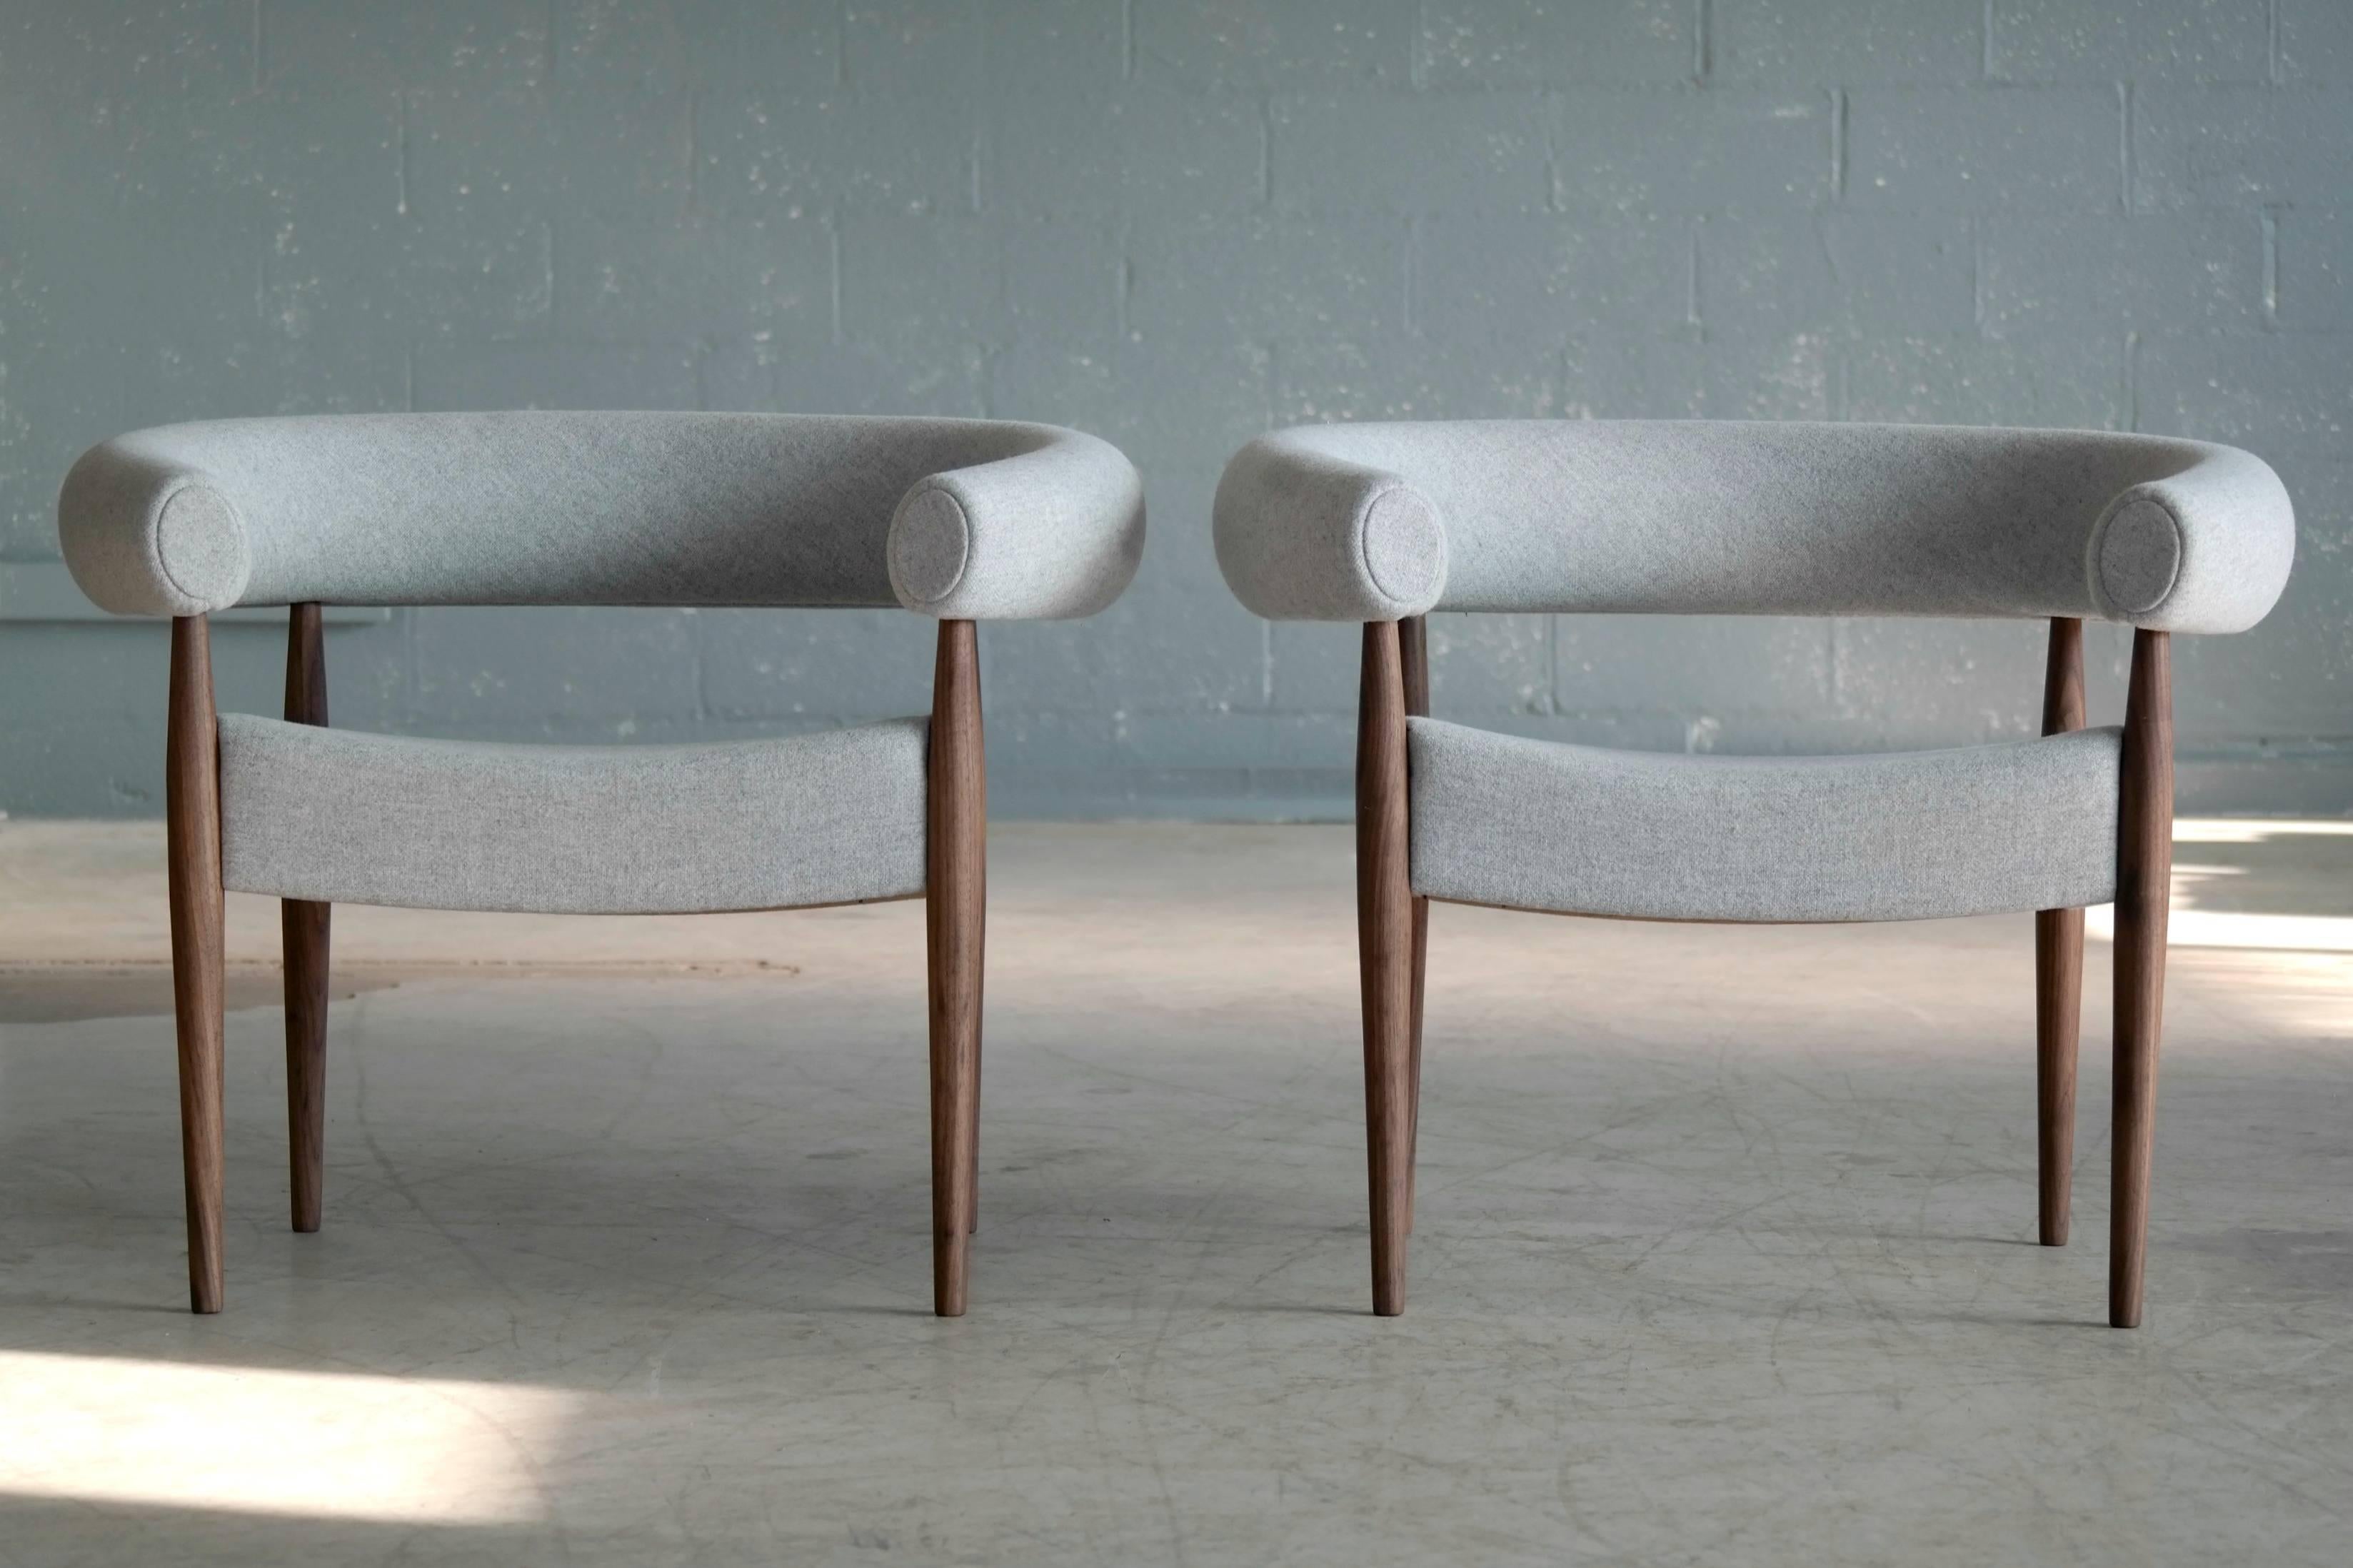 New production of Nanna and Jorgen Ditzel's ring chair manufactured by GETAMA. GETAMA had a long relationship with Nanna Ditzel, often called the 